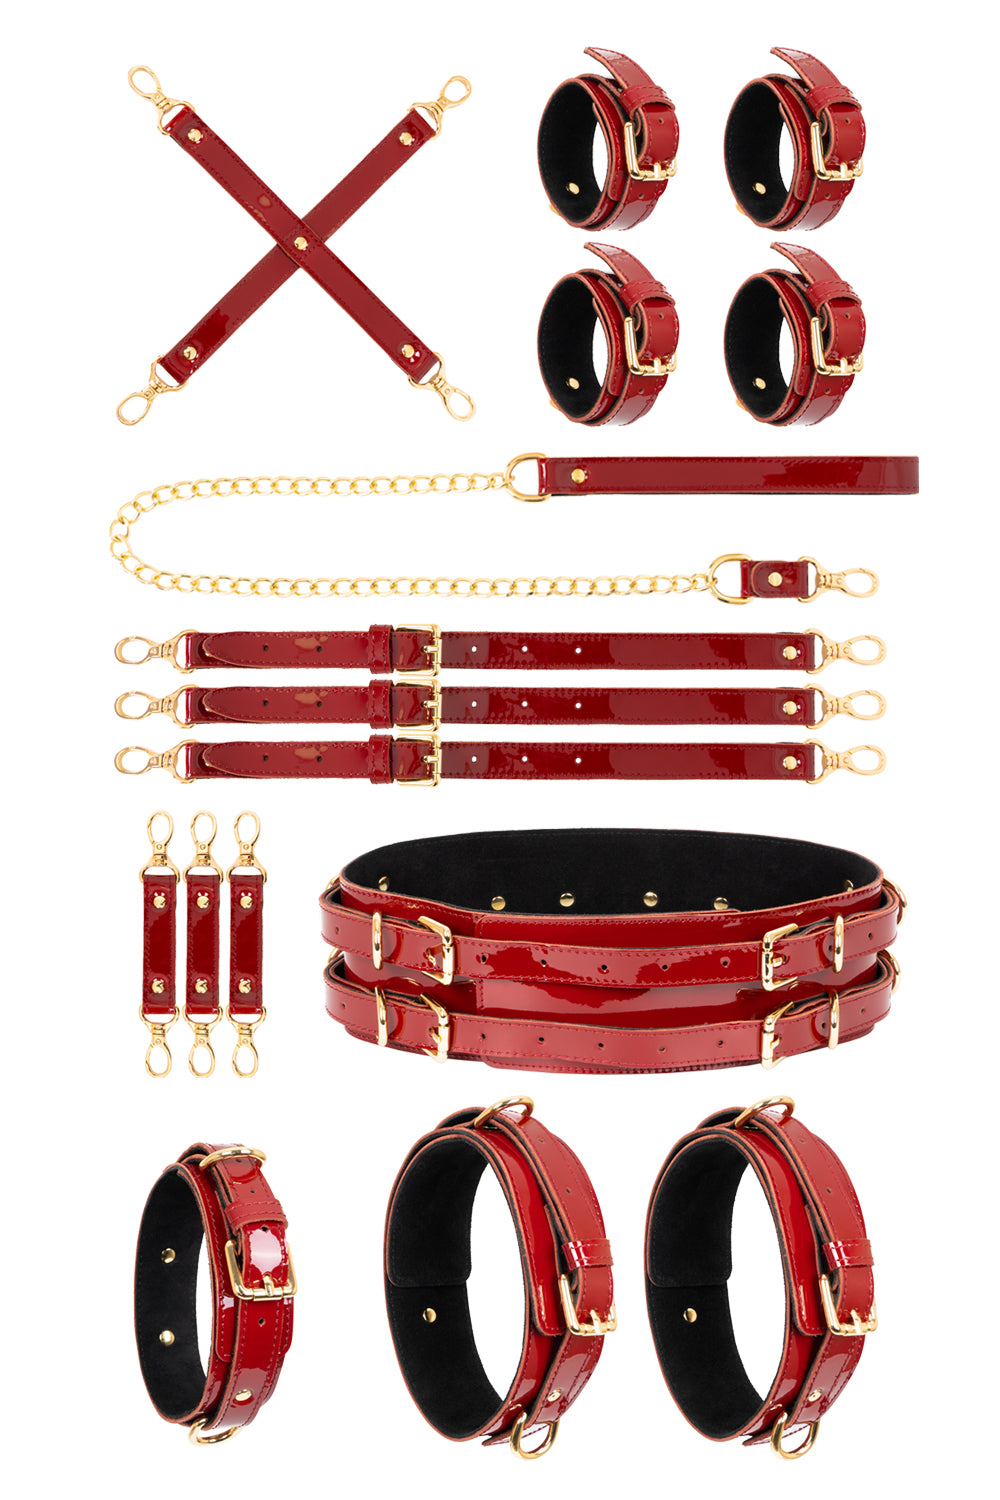 Lacquered leather FULL Set with chain leash. Burgundy